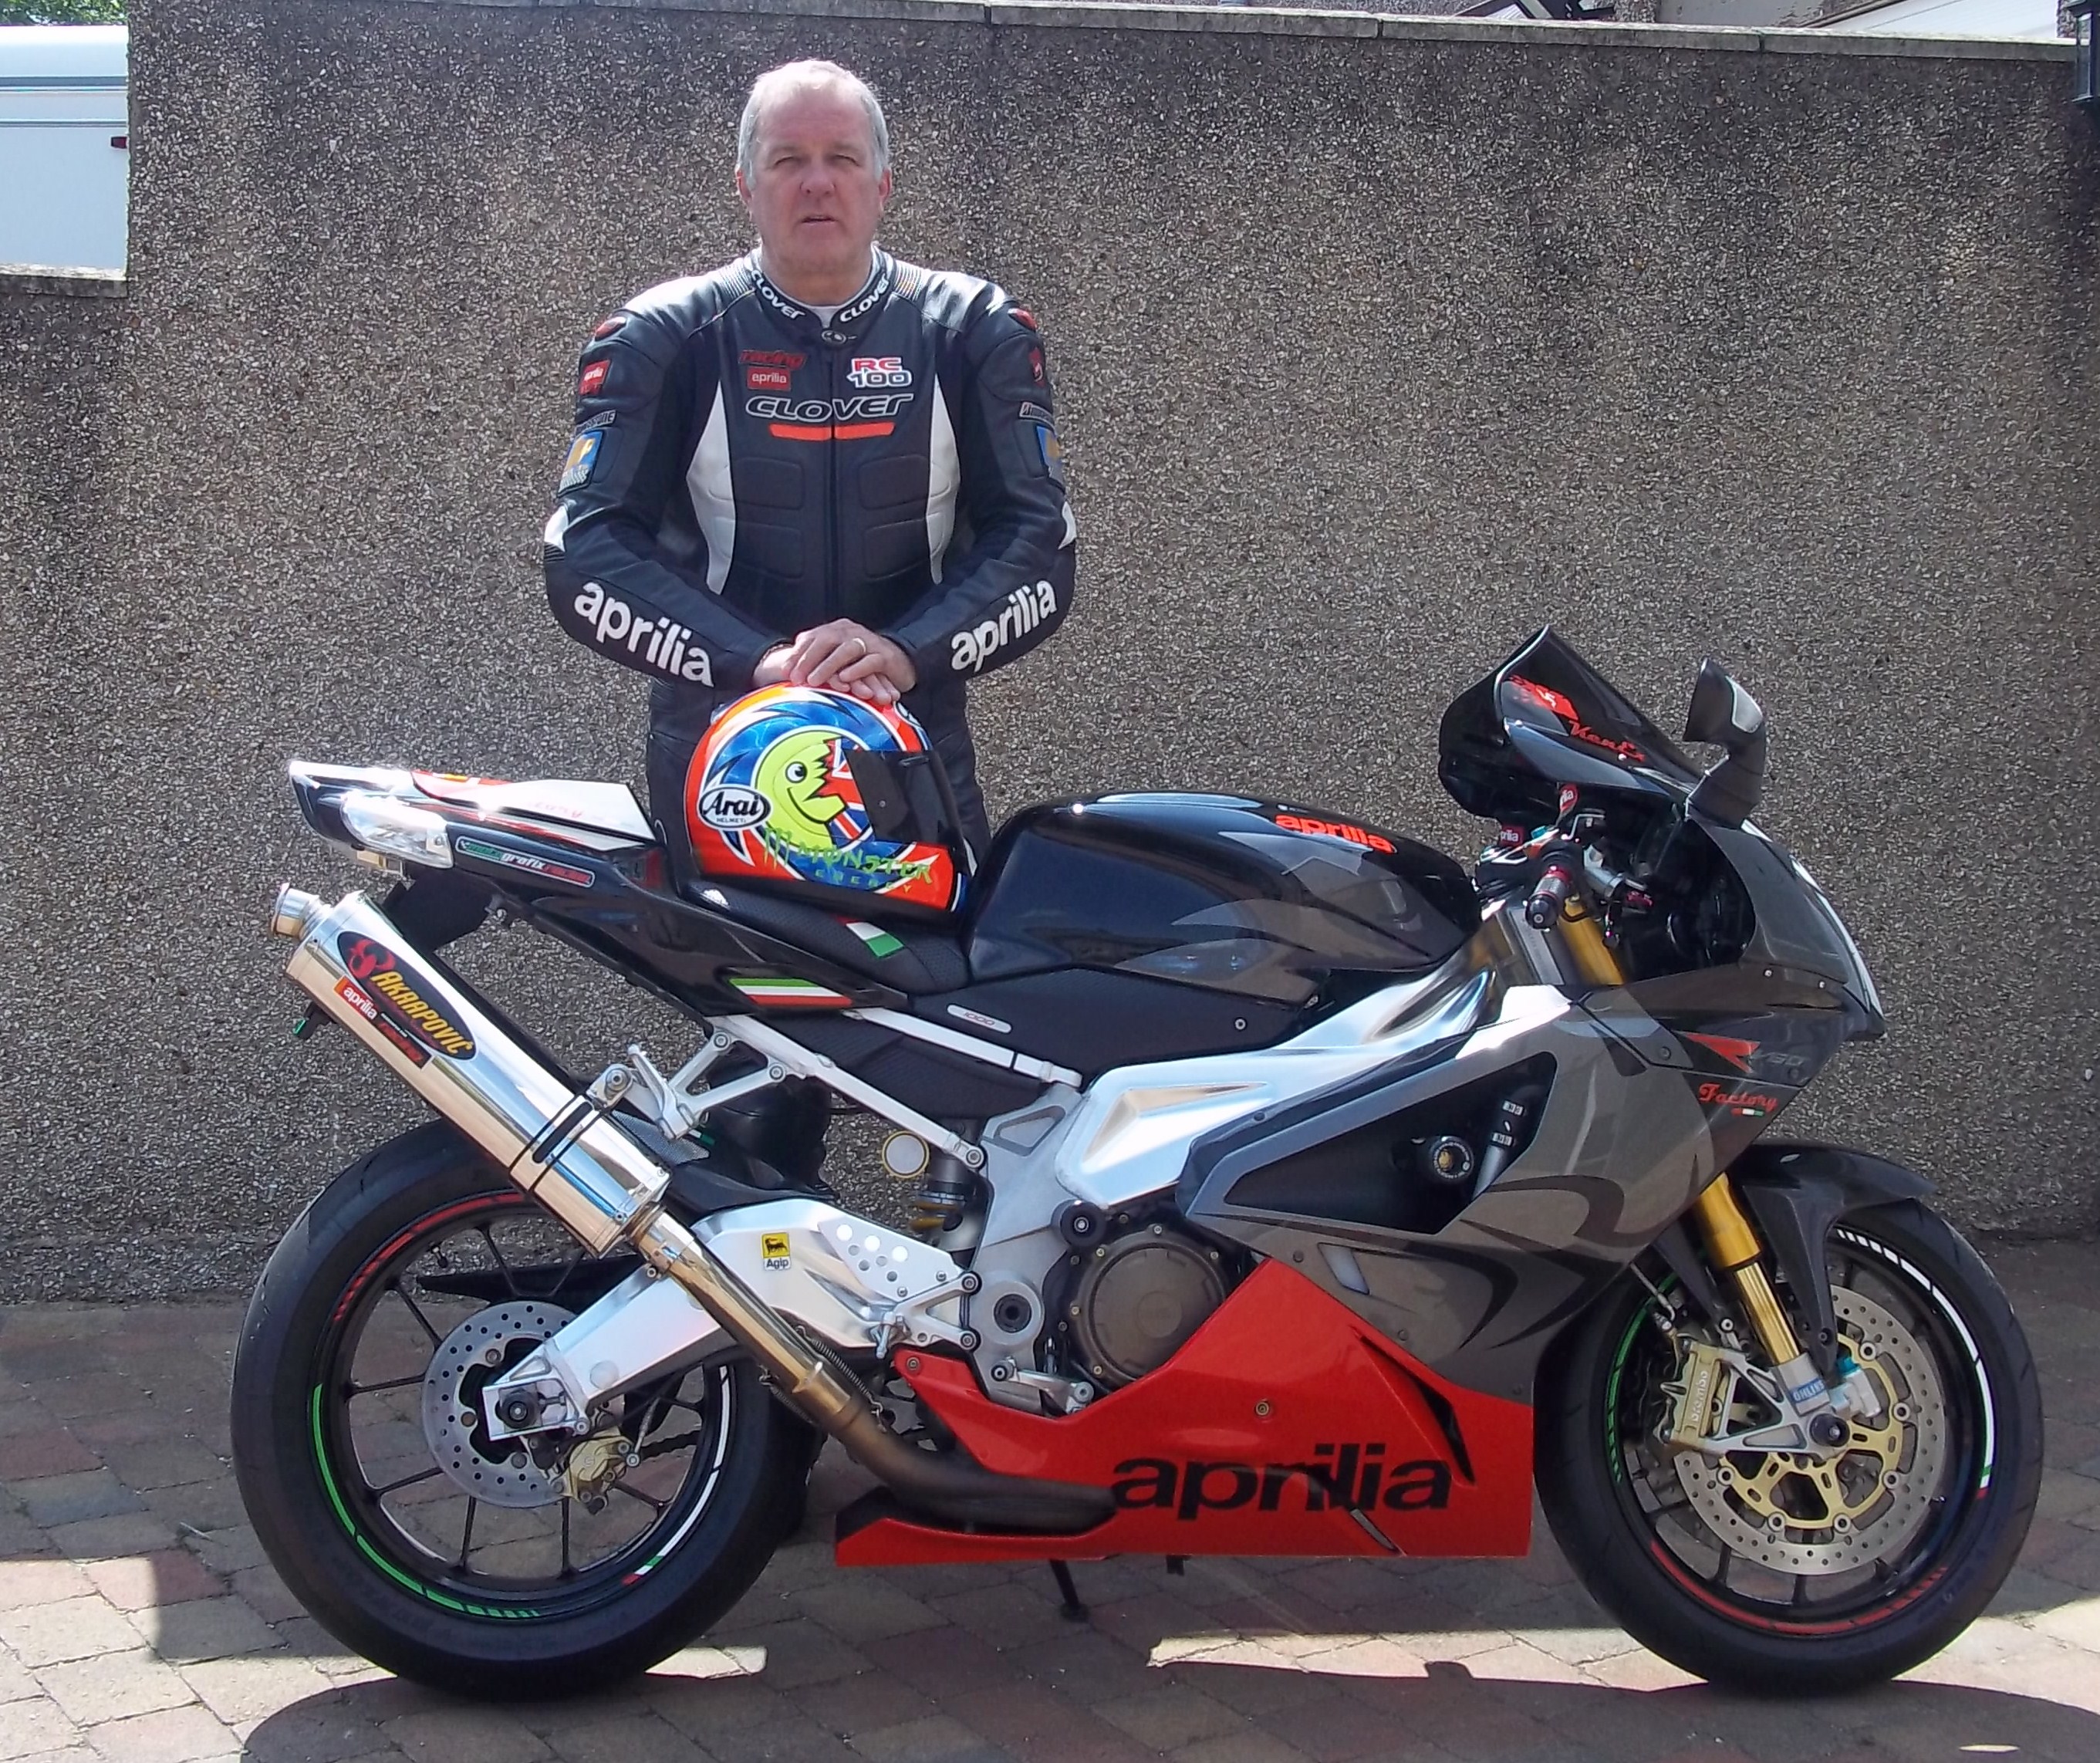 Our Aprilia RSVR 1000 ,,, Which we both ride 😀